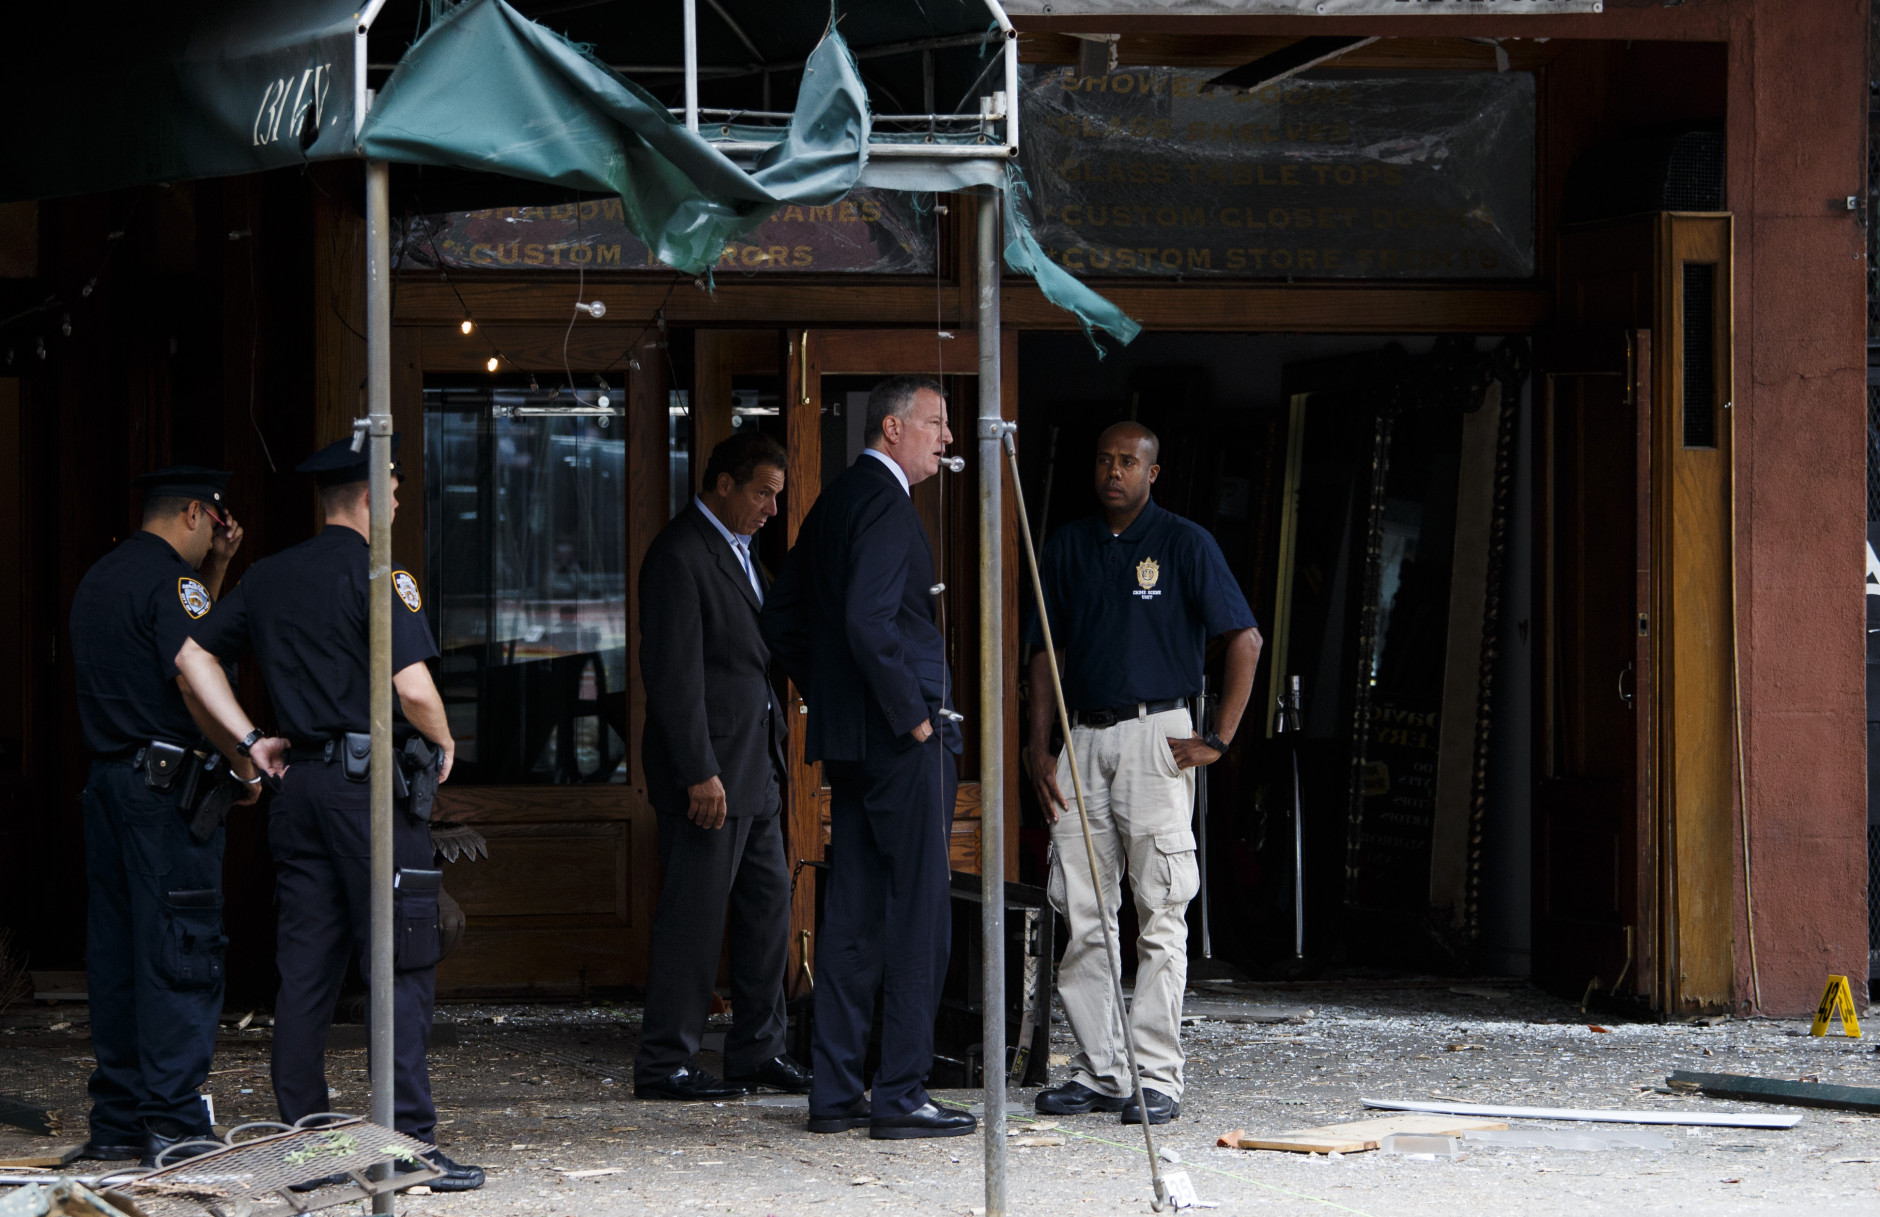 NEW YORK, NY - SEPTEMBER 18: New York Mayor Bill de Blasio (2nd R) and New York Governor Andrew Cuomo (3rd R) tour the site of an explosion that occurred on Saturday night on September 18, 2016 in the Chelsea neighborhood of New York City. An explosion in a construction dumpster that injured 29 people is being labeled an "intentional act". A second device, a pressure cooker, was found four blocks away that an early investigation found was likely also a bomb. (Photo by Justin Lane-Pool/Getty Images)